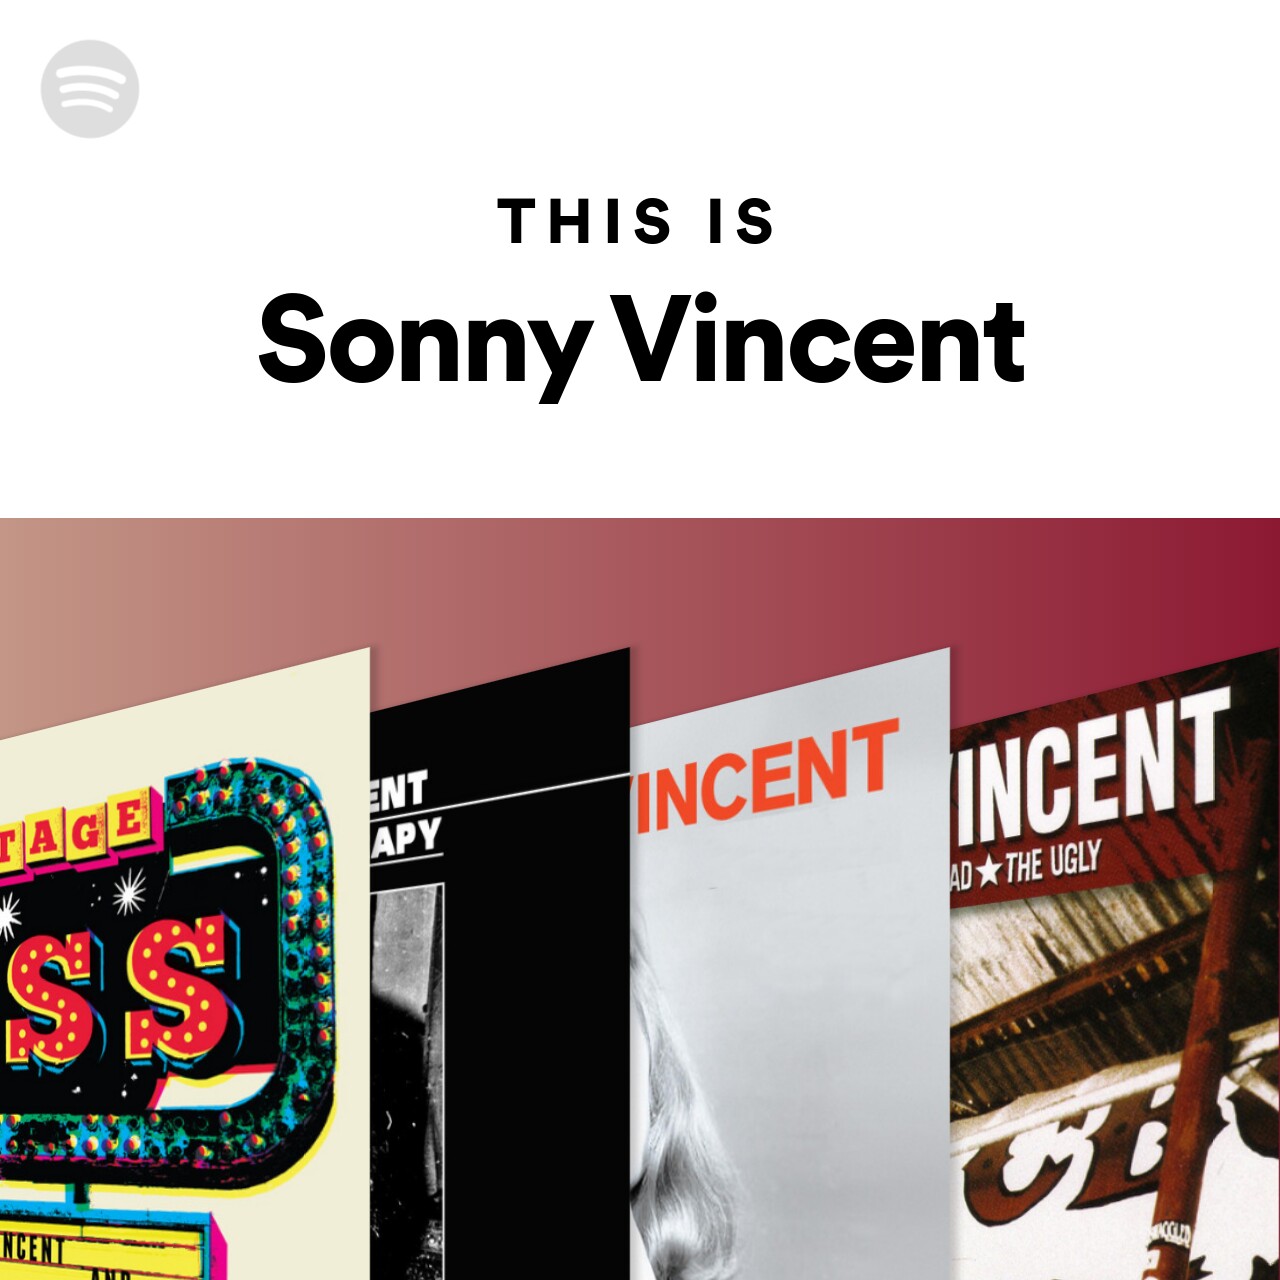 This Is Sonny Vincent